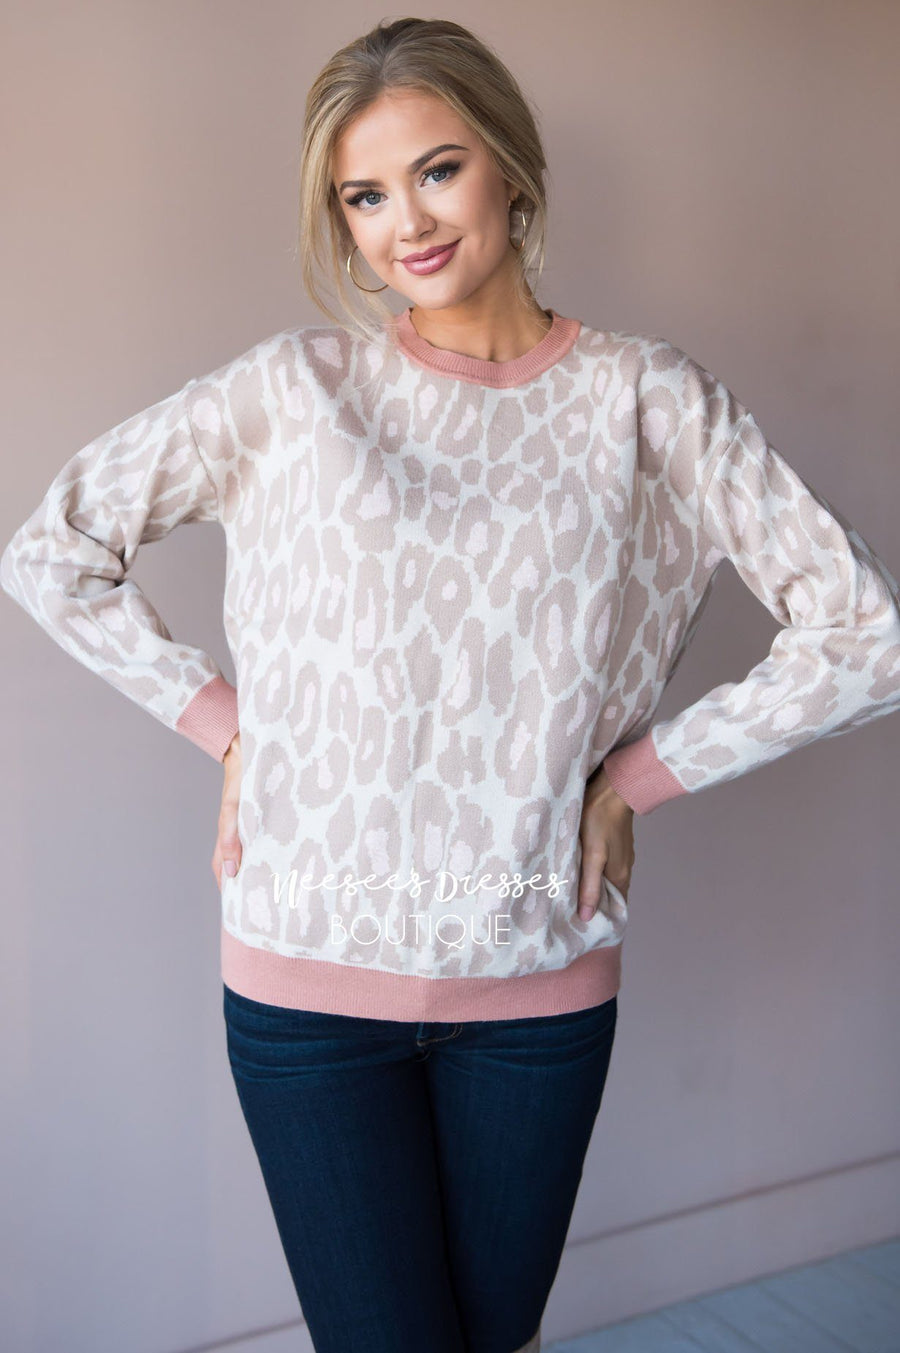 Stand By Me animal print sweater